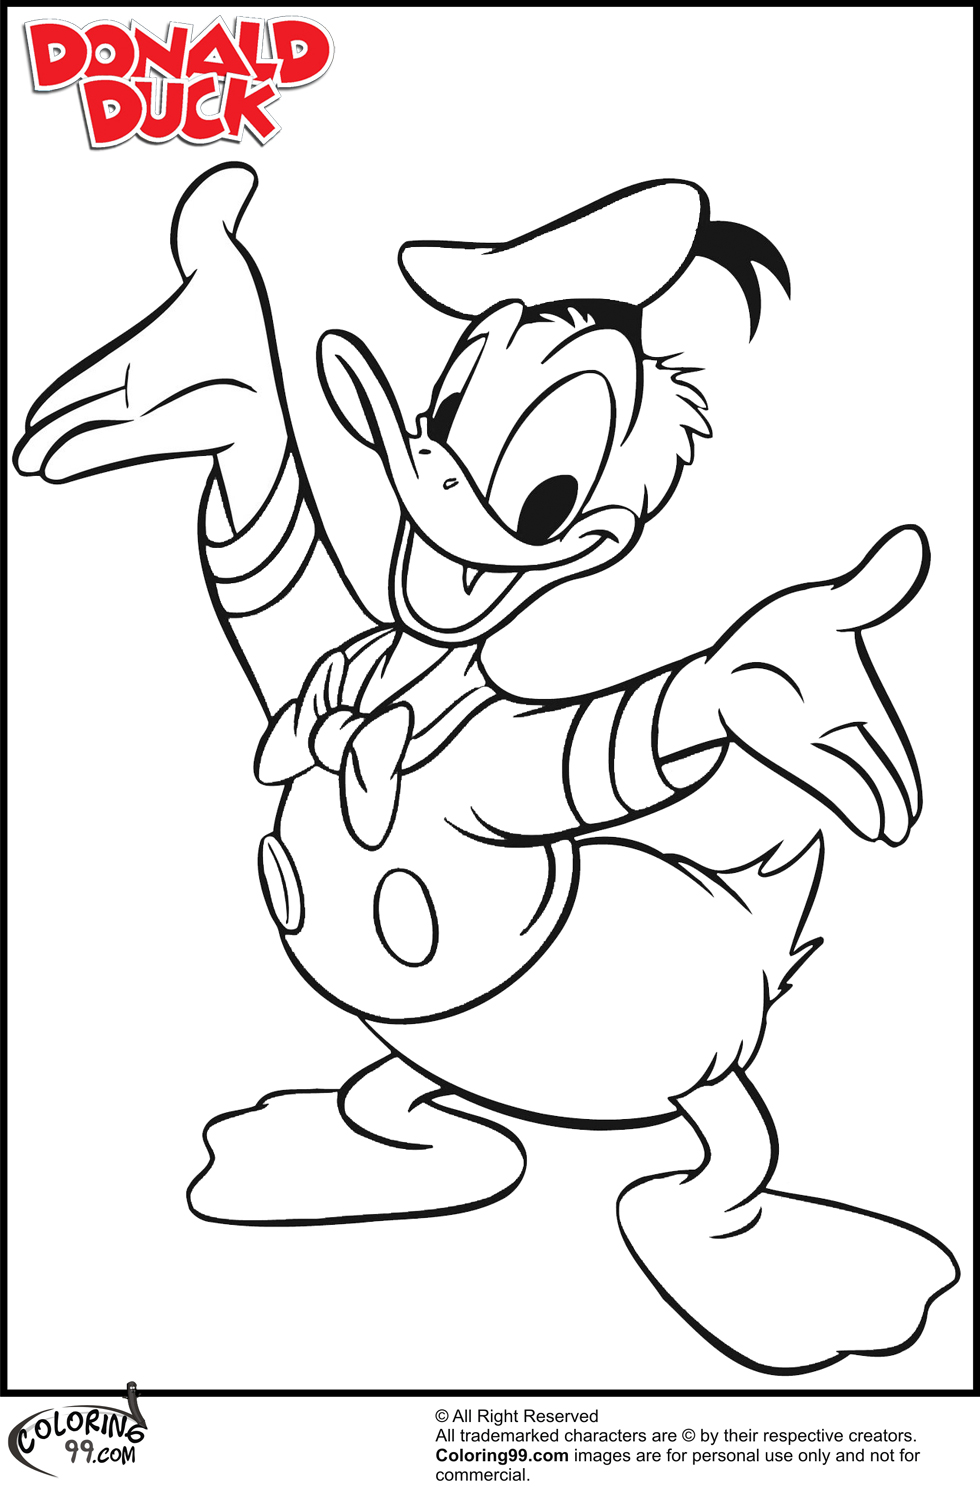 Donald Duck Coloring Pages Team colors